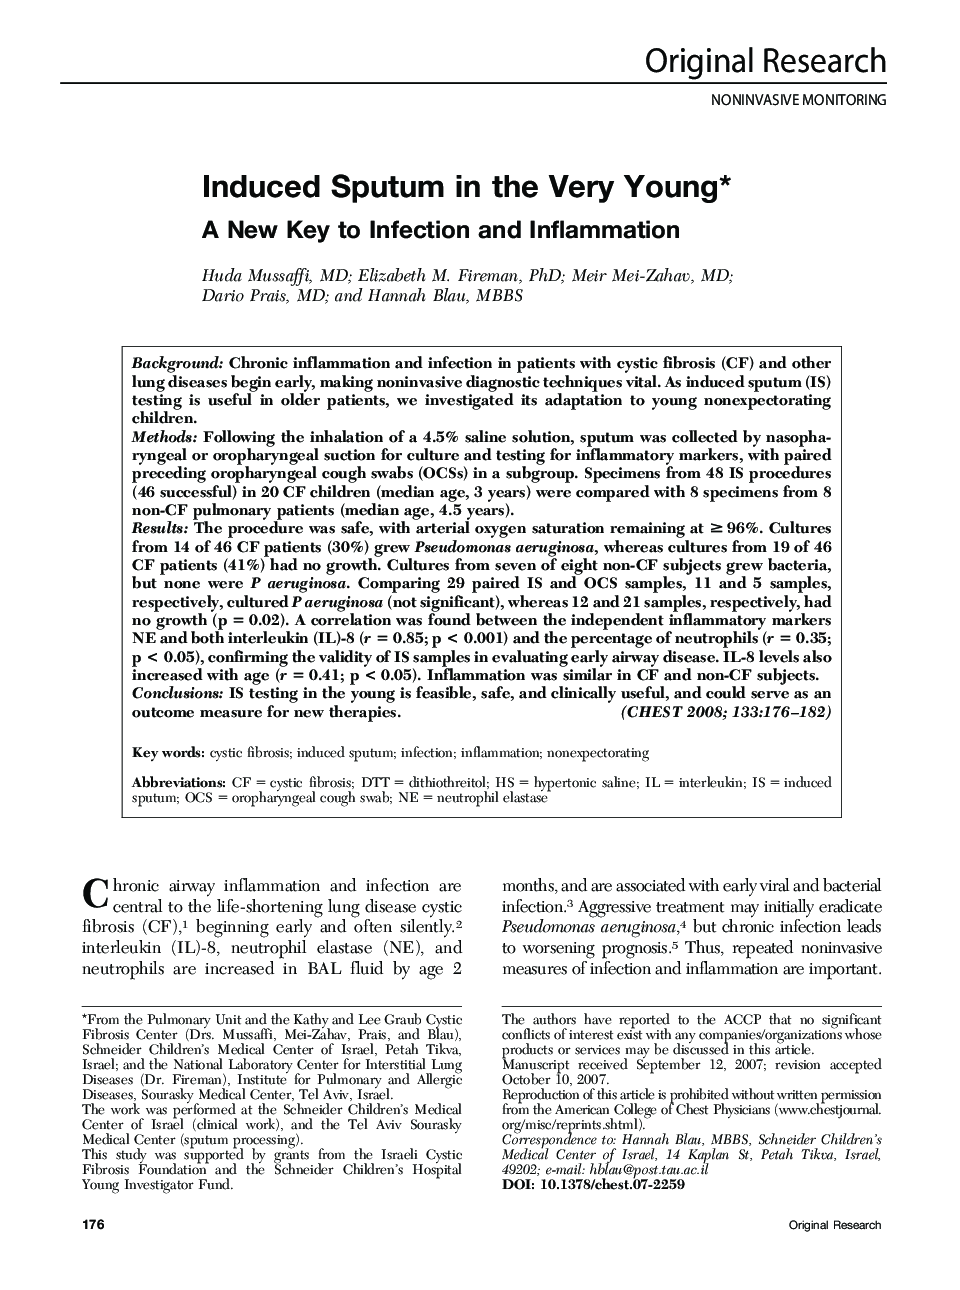 Induced Sputum in the Very Young : A New Key to Infection and Inflammation